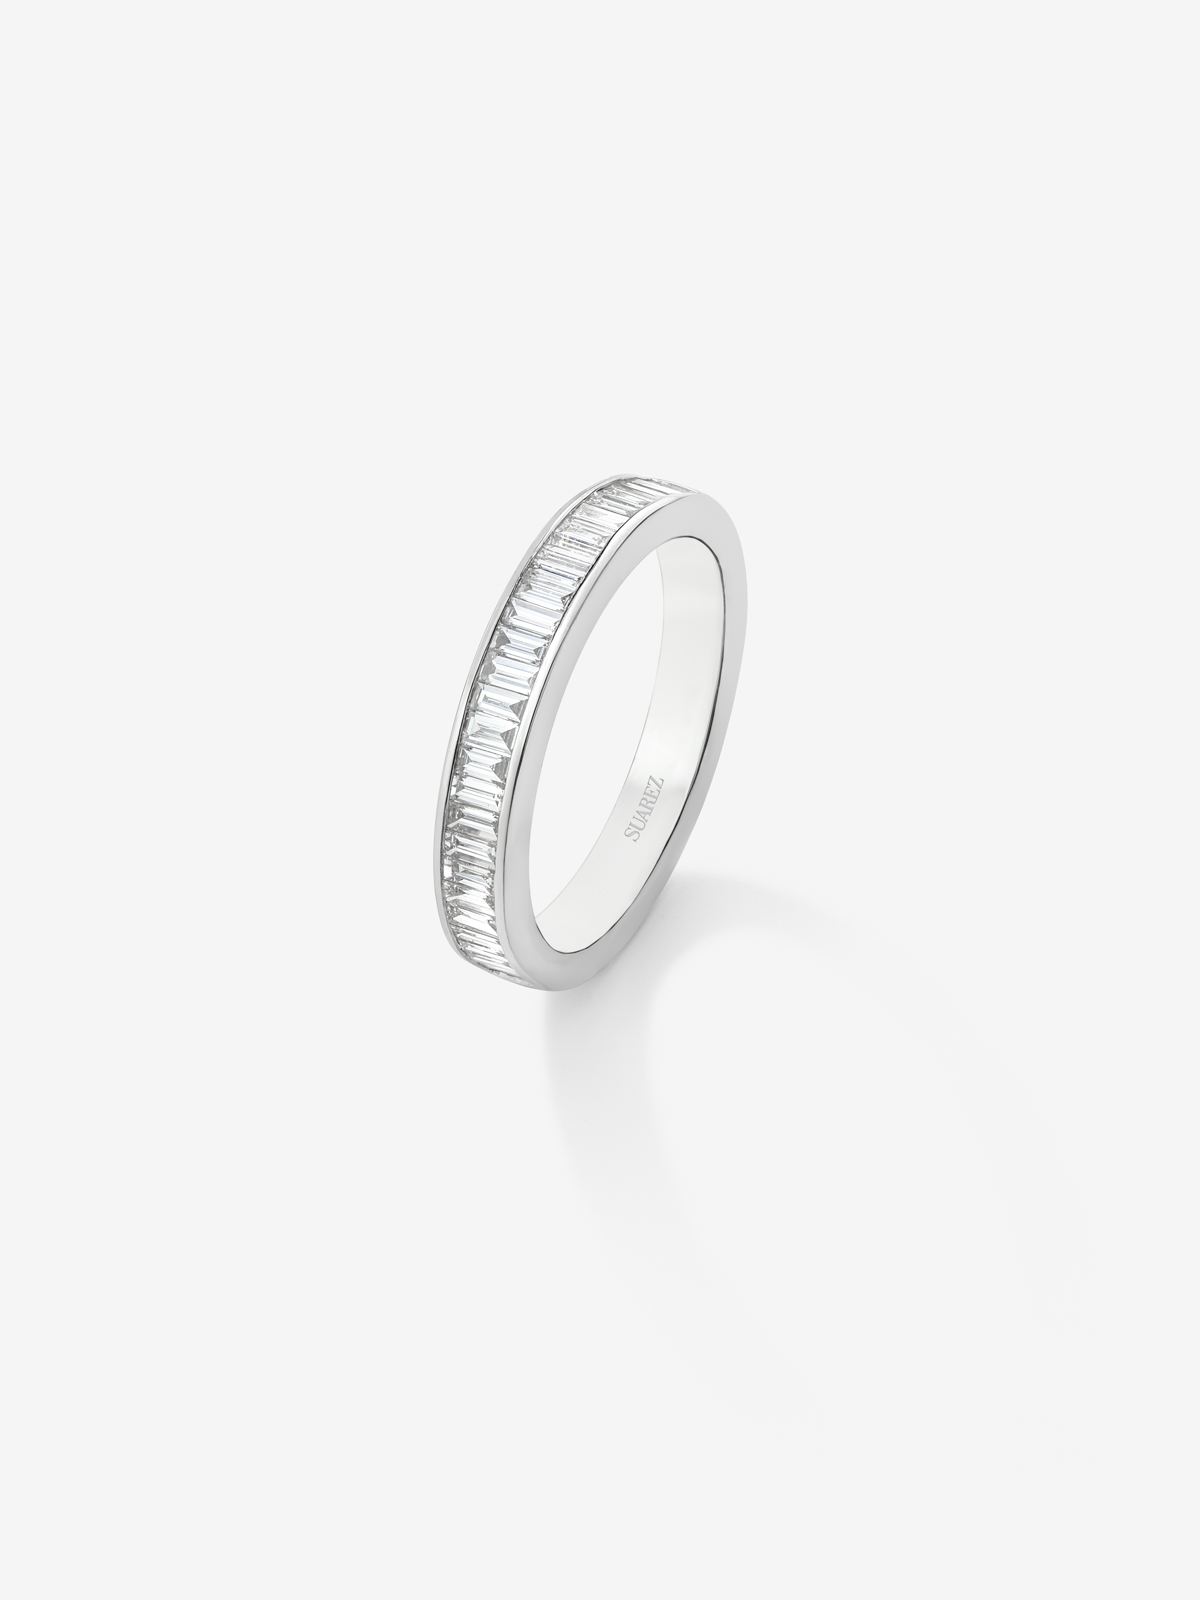 Half-eternity engagement ring in 18K white gold with baguette-cut diamonds on band 0.52ct